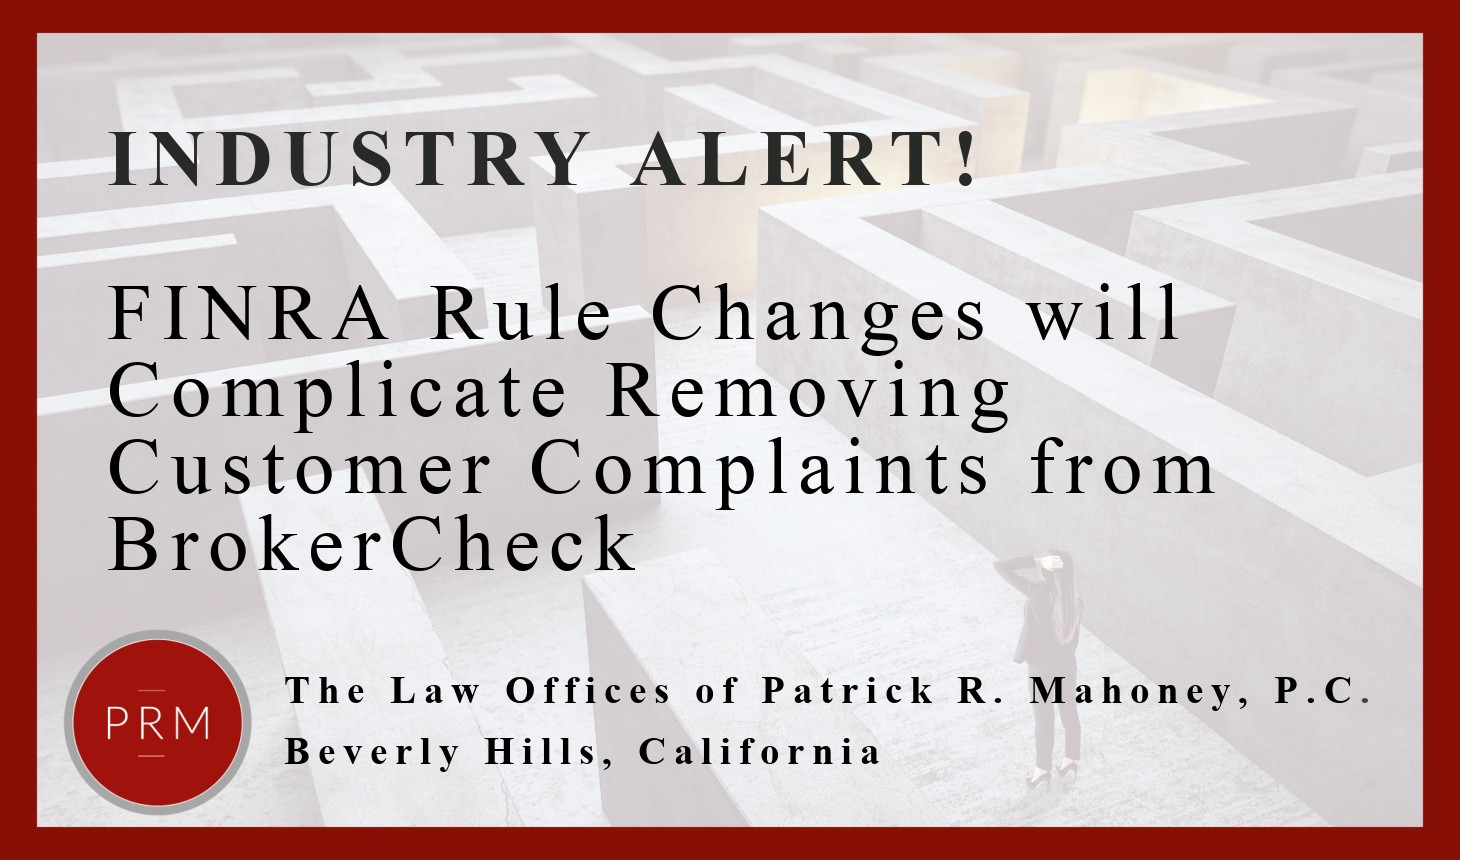 New FINRA Rules will Complicate Removing Complaints from BrokerCheck